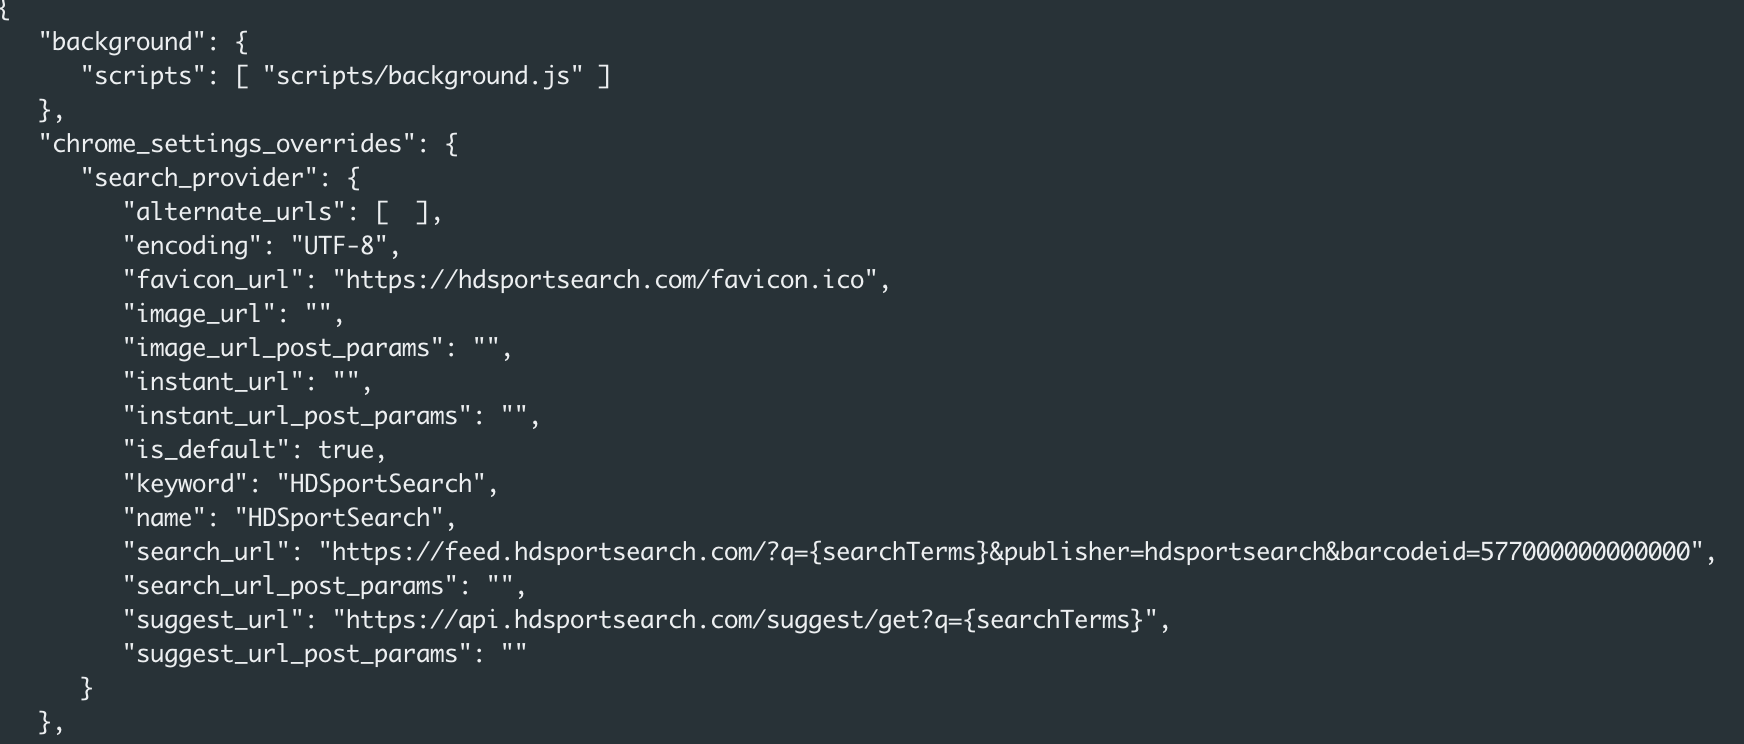 Upon downloading and analyzing the extension, the manifest.json file bundled in the extension package revealed that the HDSportSearch extension is a search engine hijacker that overrides the search engine default values for the browser, as shown here. 